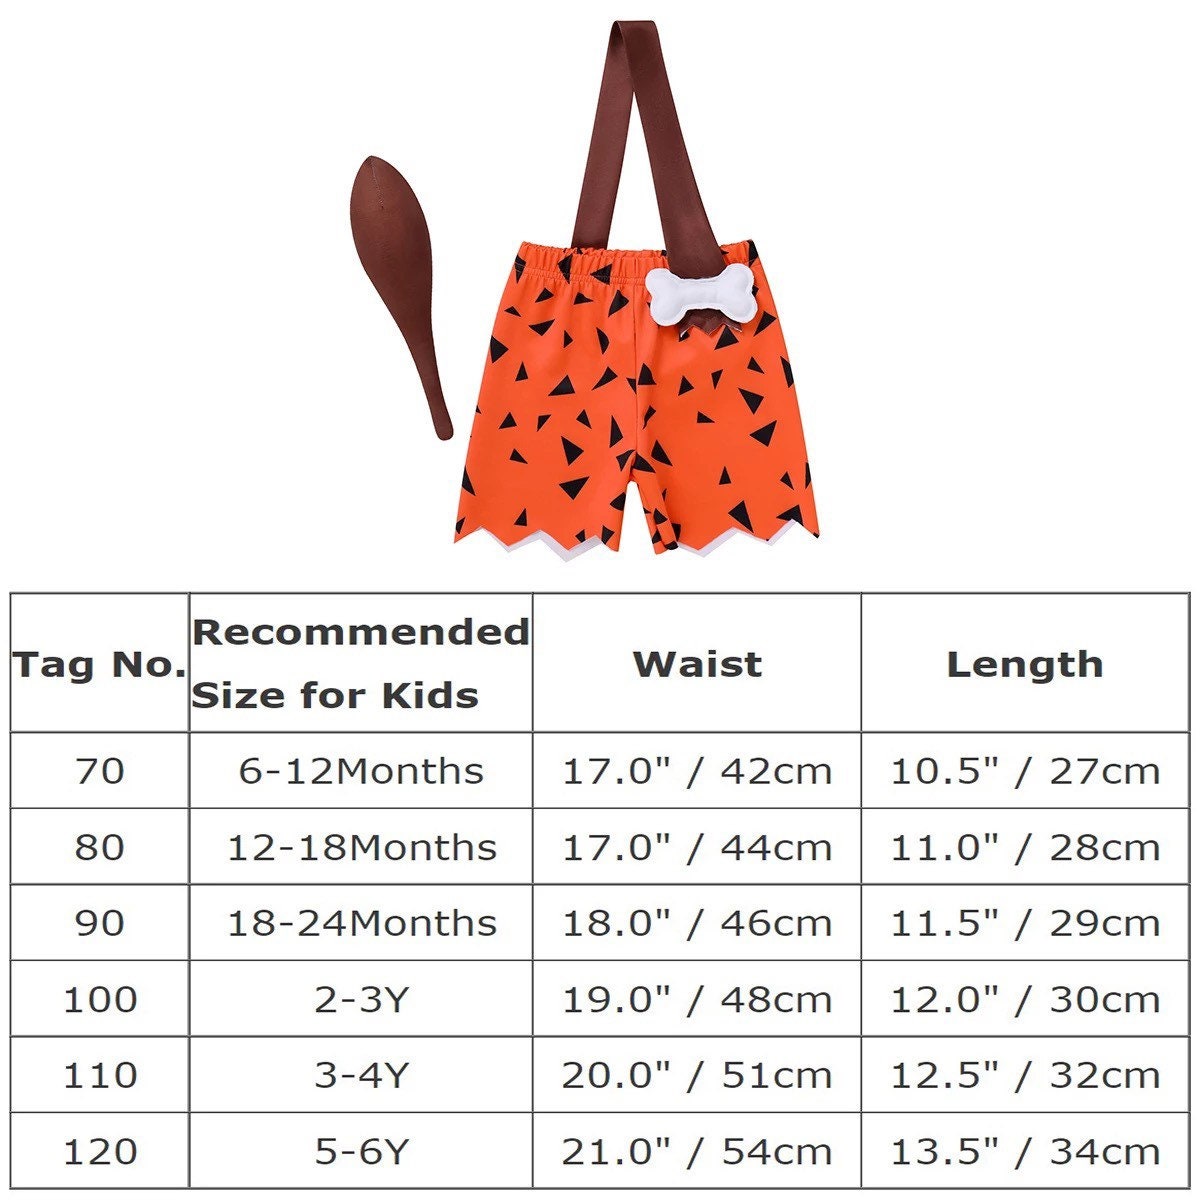 Baby Pebbles Flintstone Costume Historical Stone Age Cave Man Outfits for Baby Girls Boys Caveman Cavegirl Party Photo Shoot